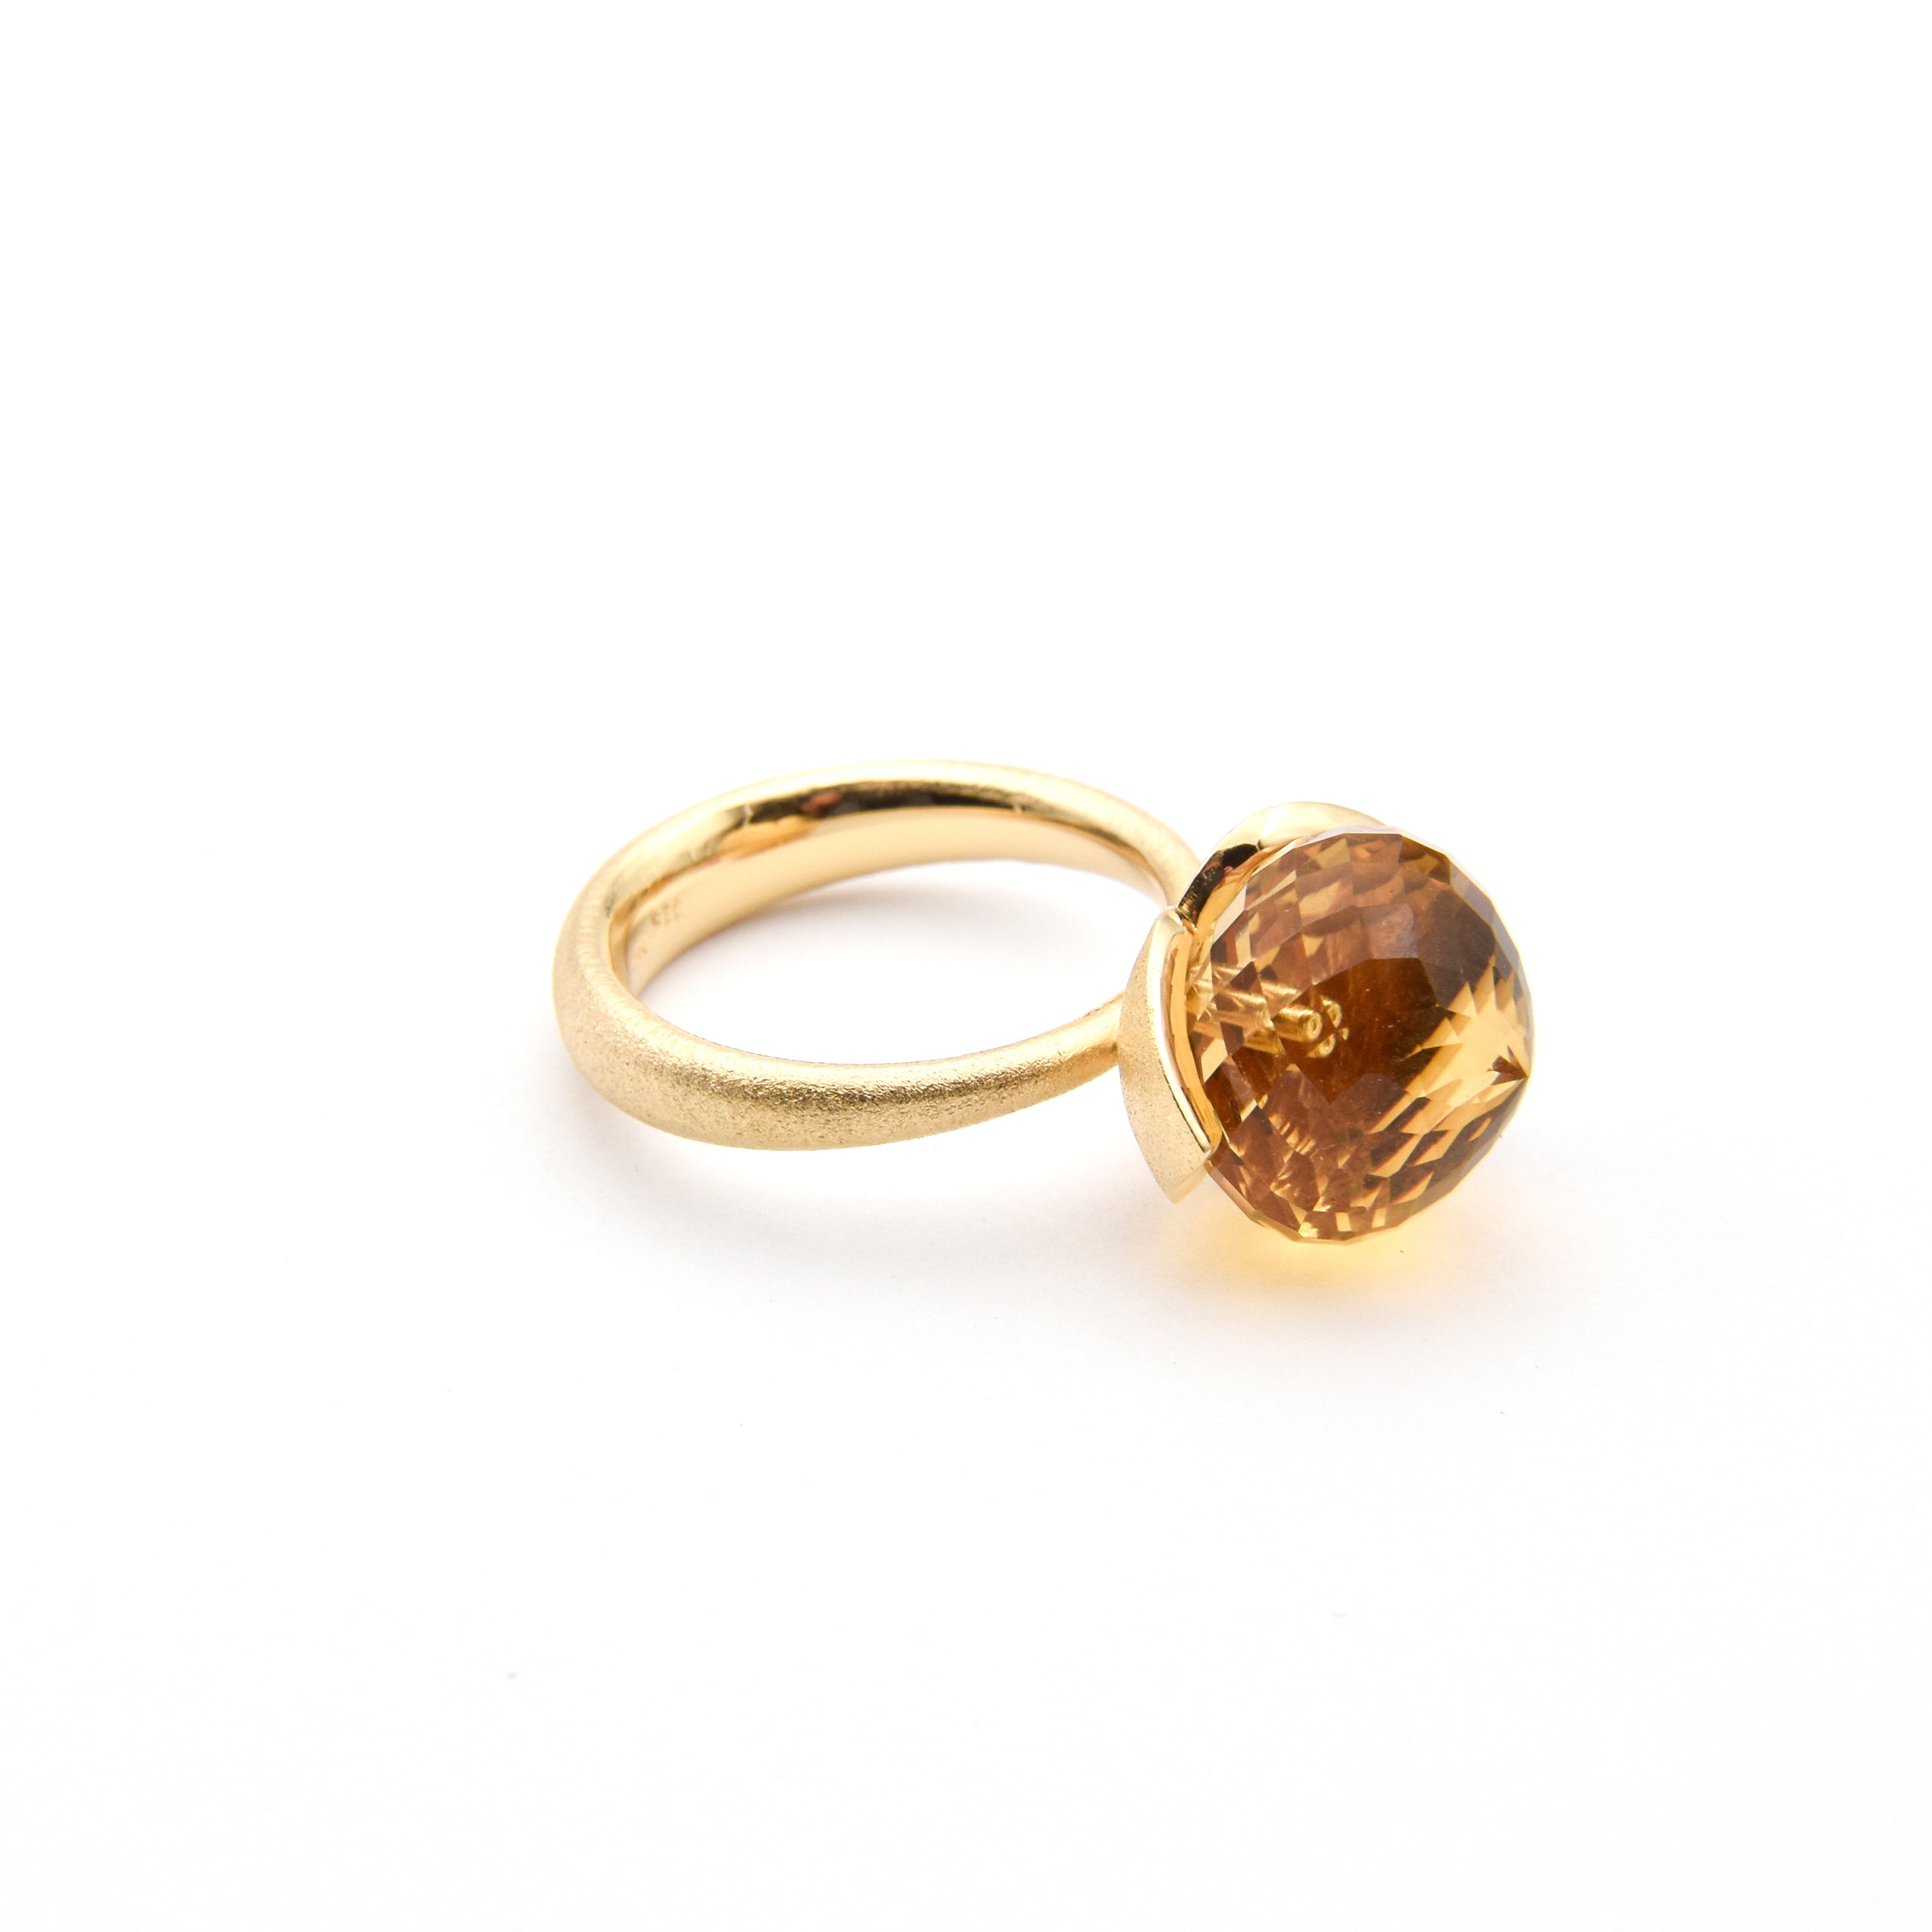 Dolce ring "big" with champagne quartz 925/-